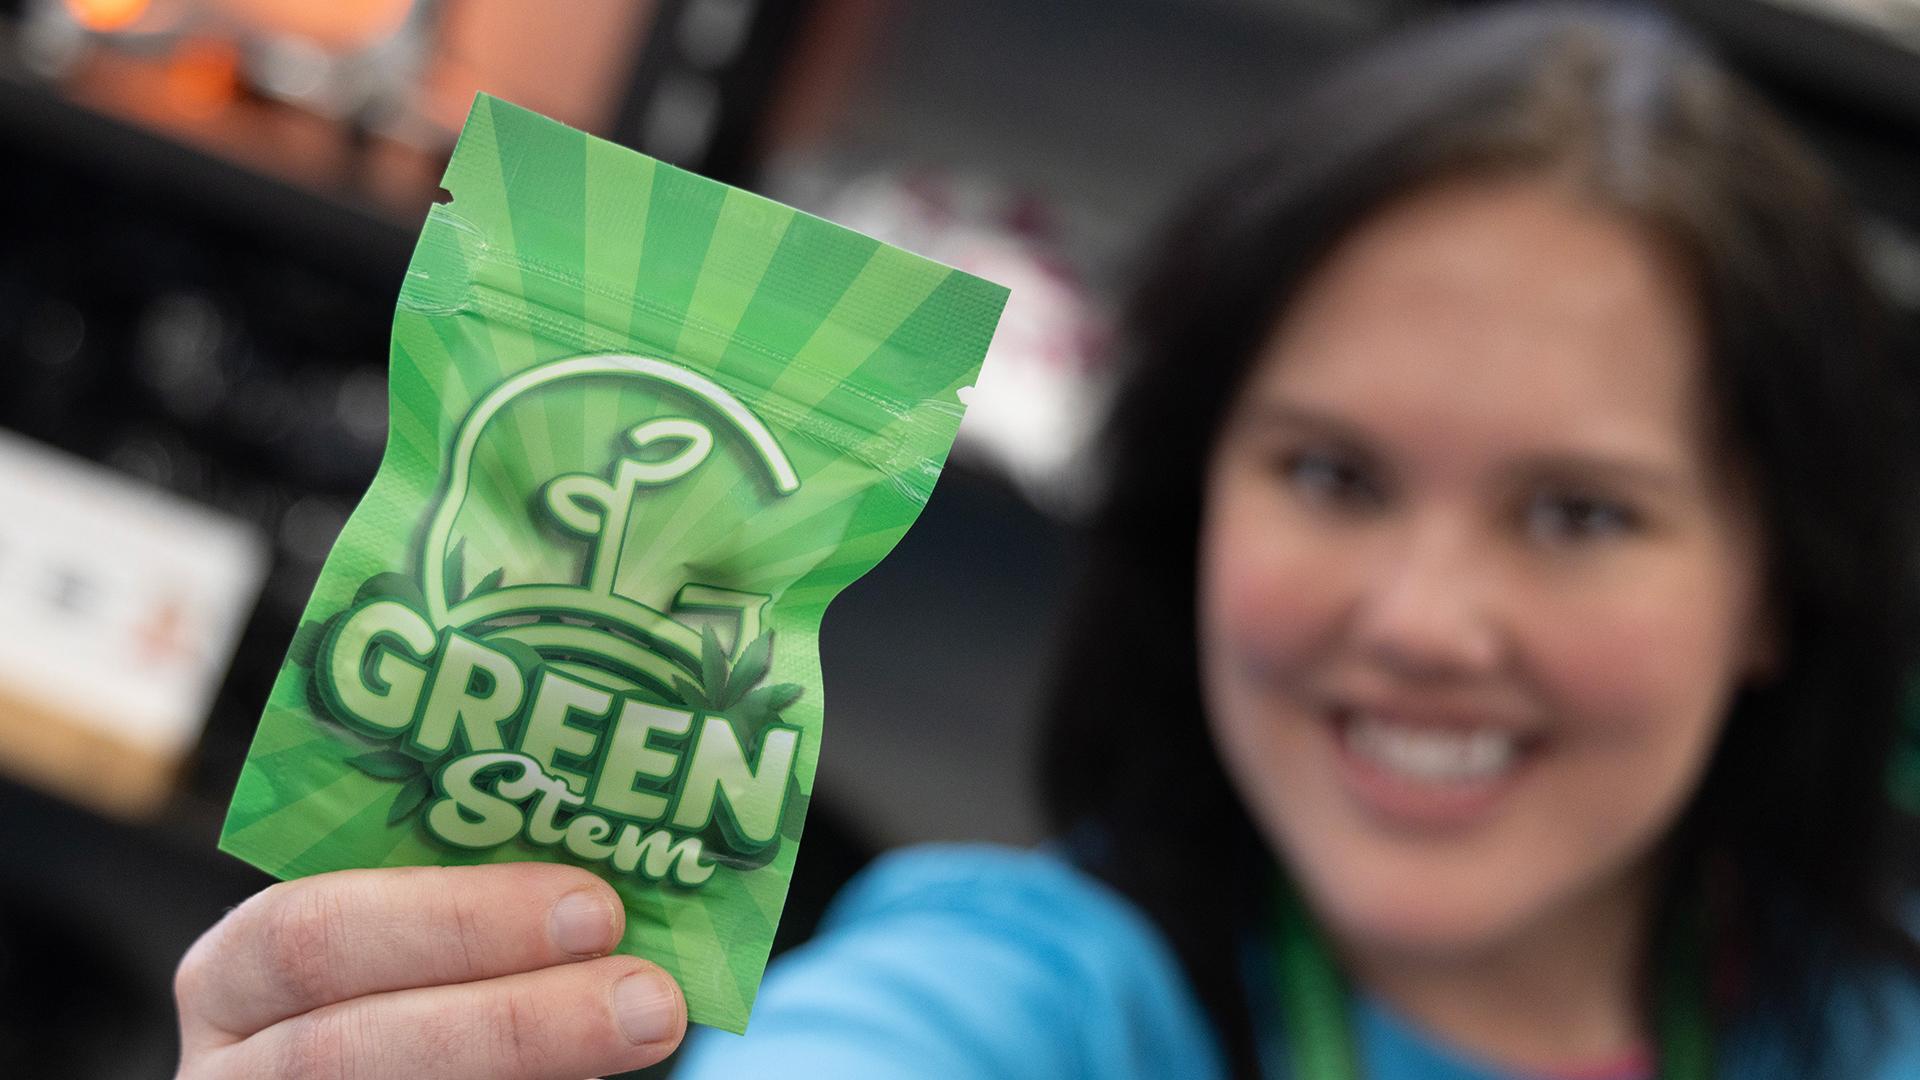 A woman holding a bag of Green Stem product